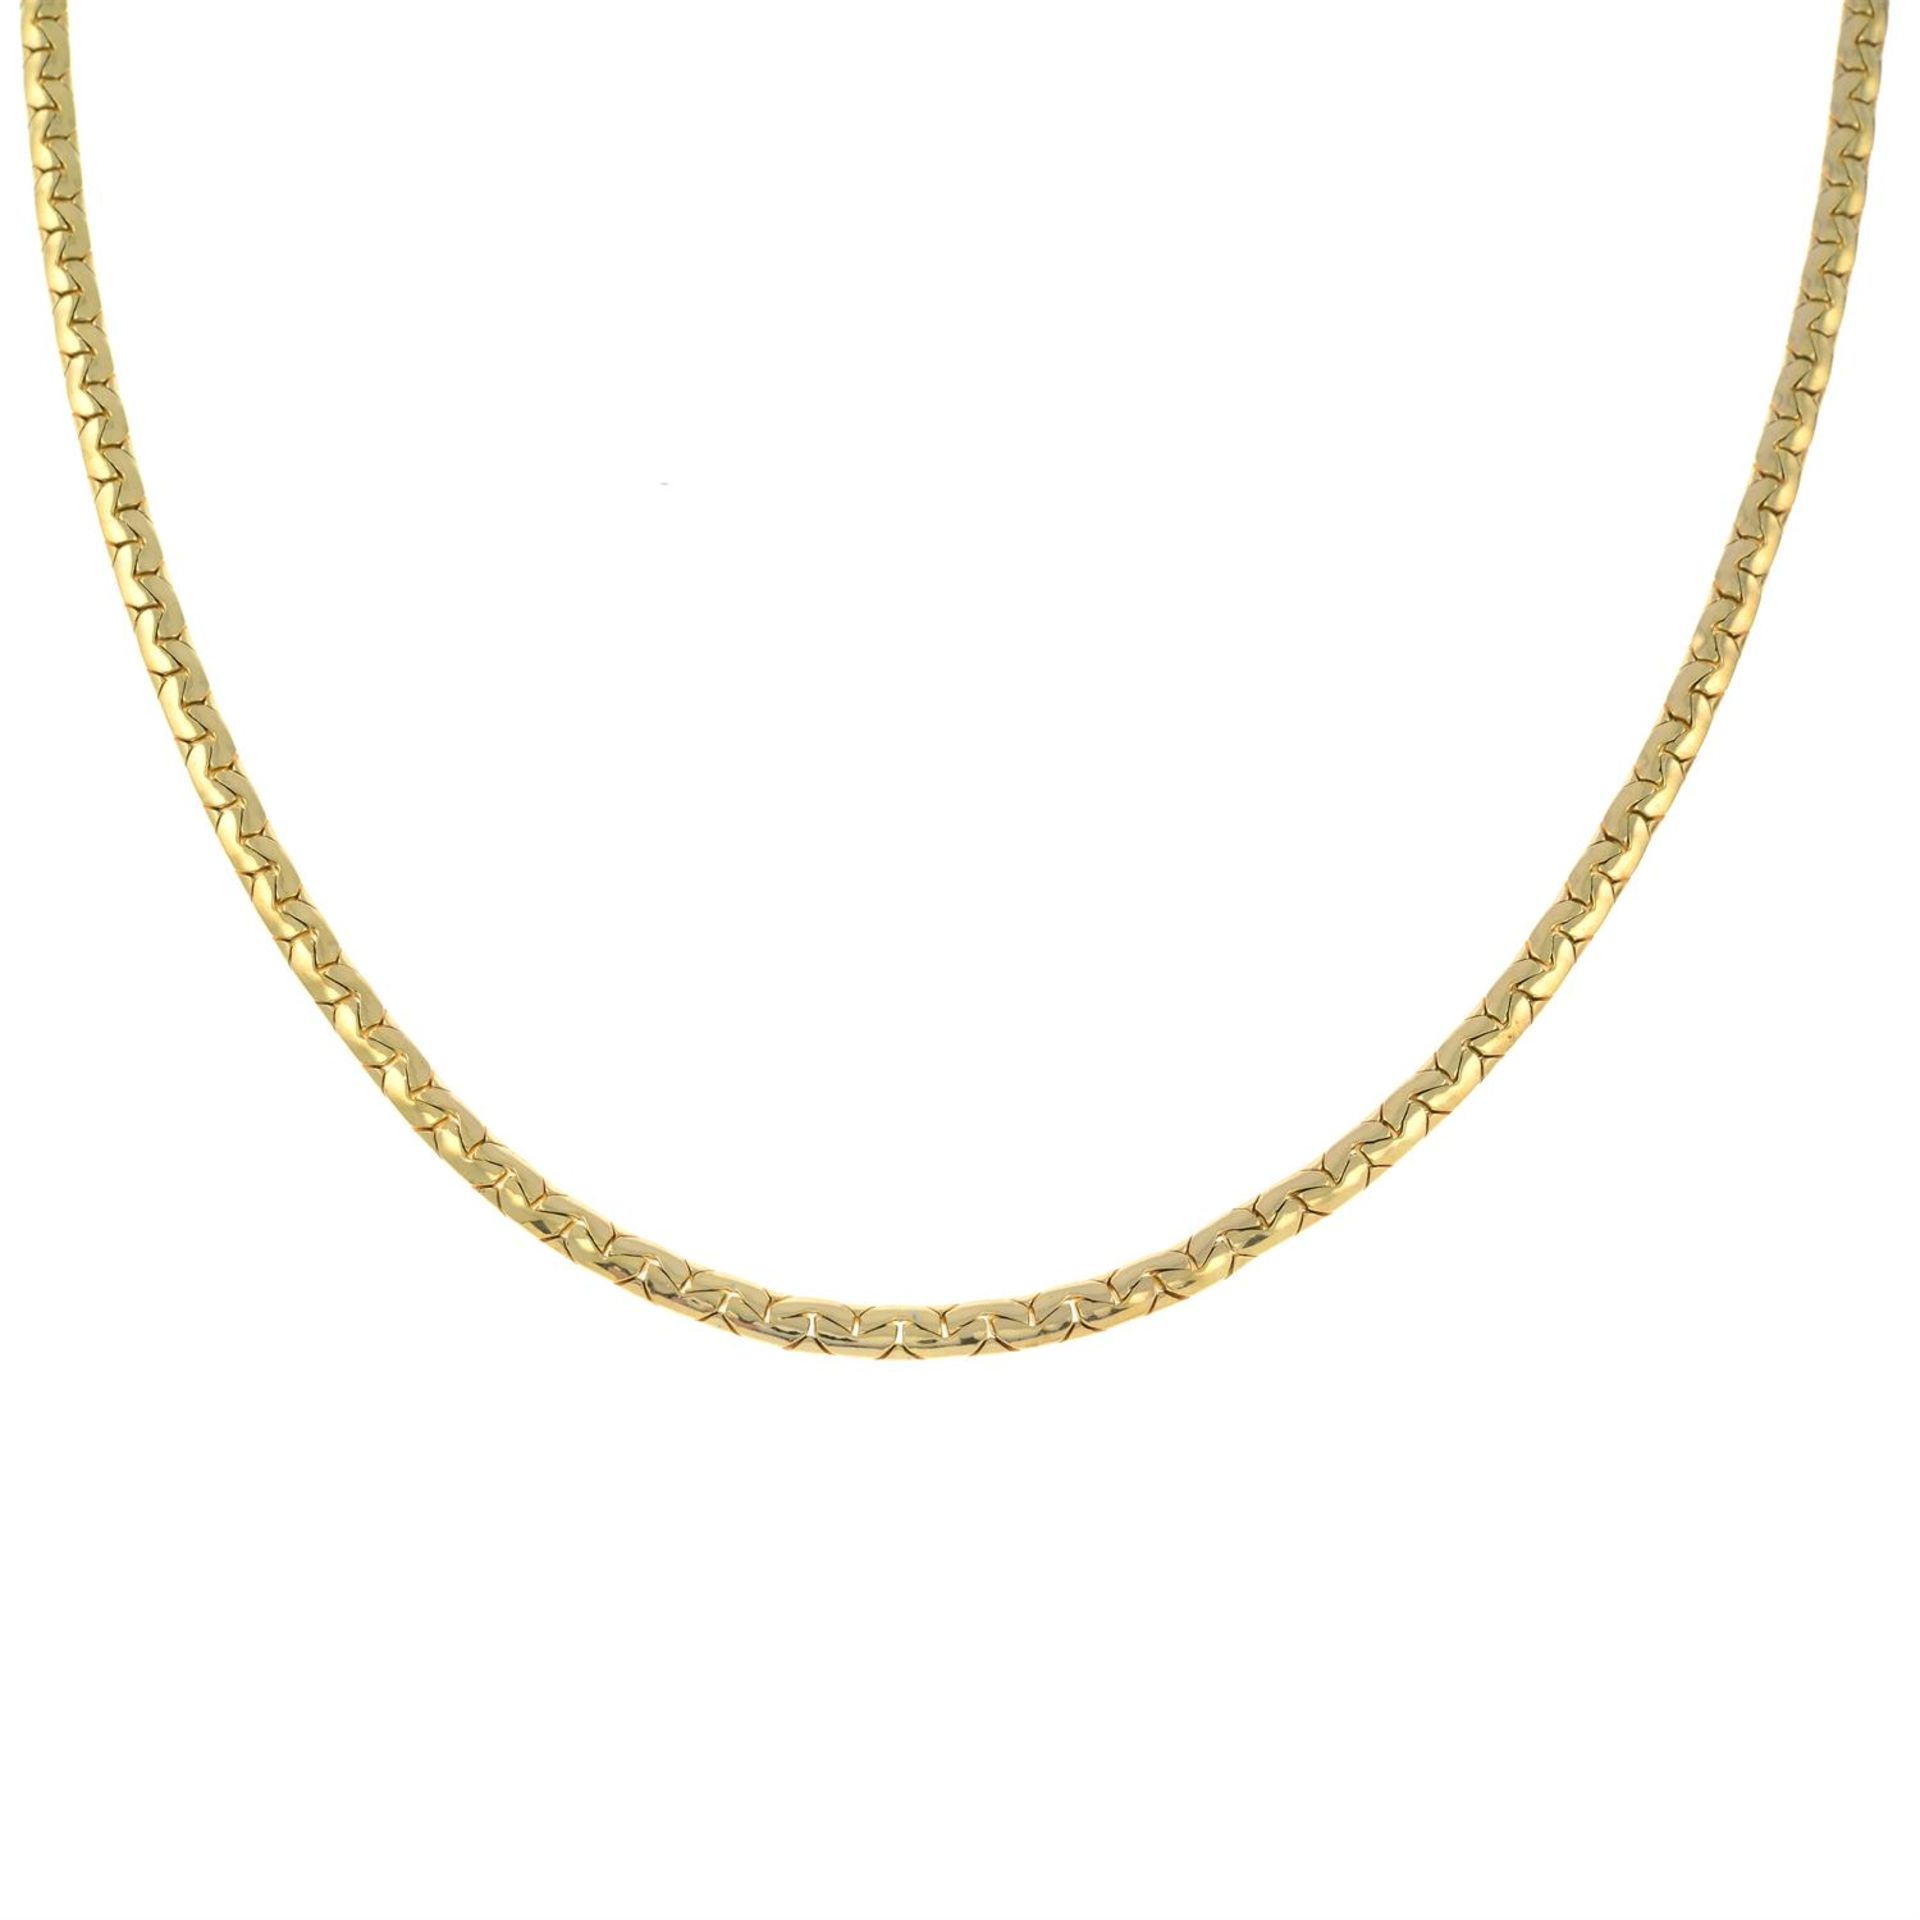 CHRISTIAN DIOR - a snake chain necklace.